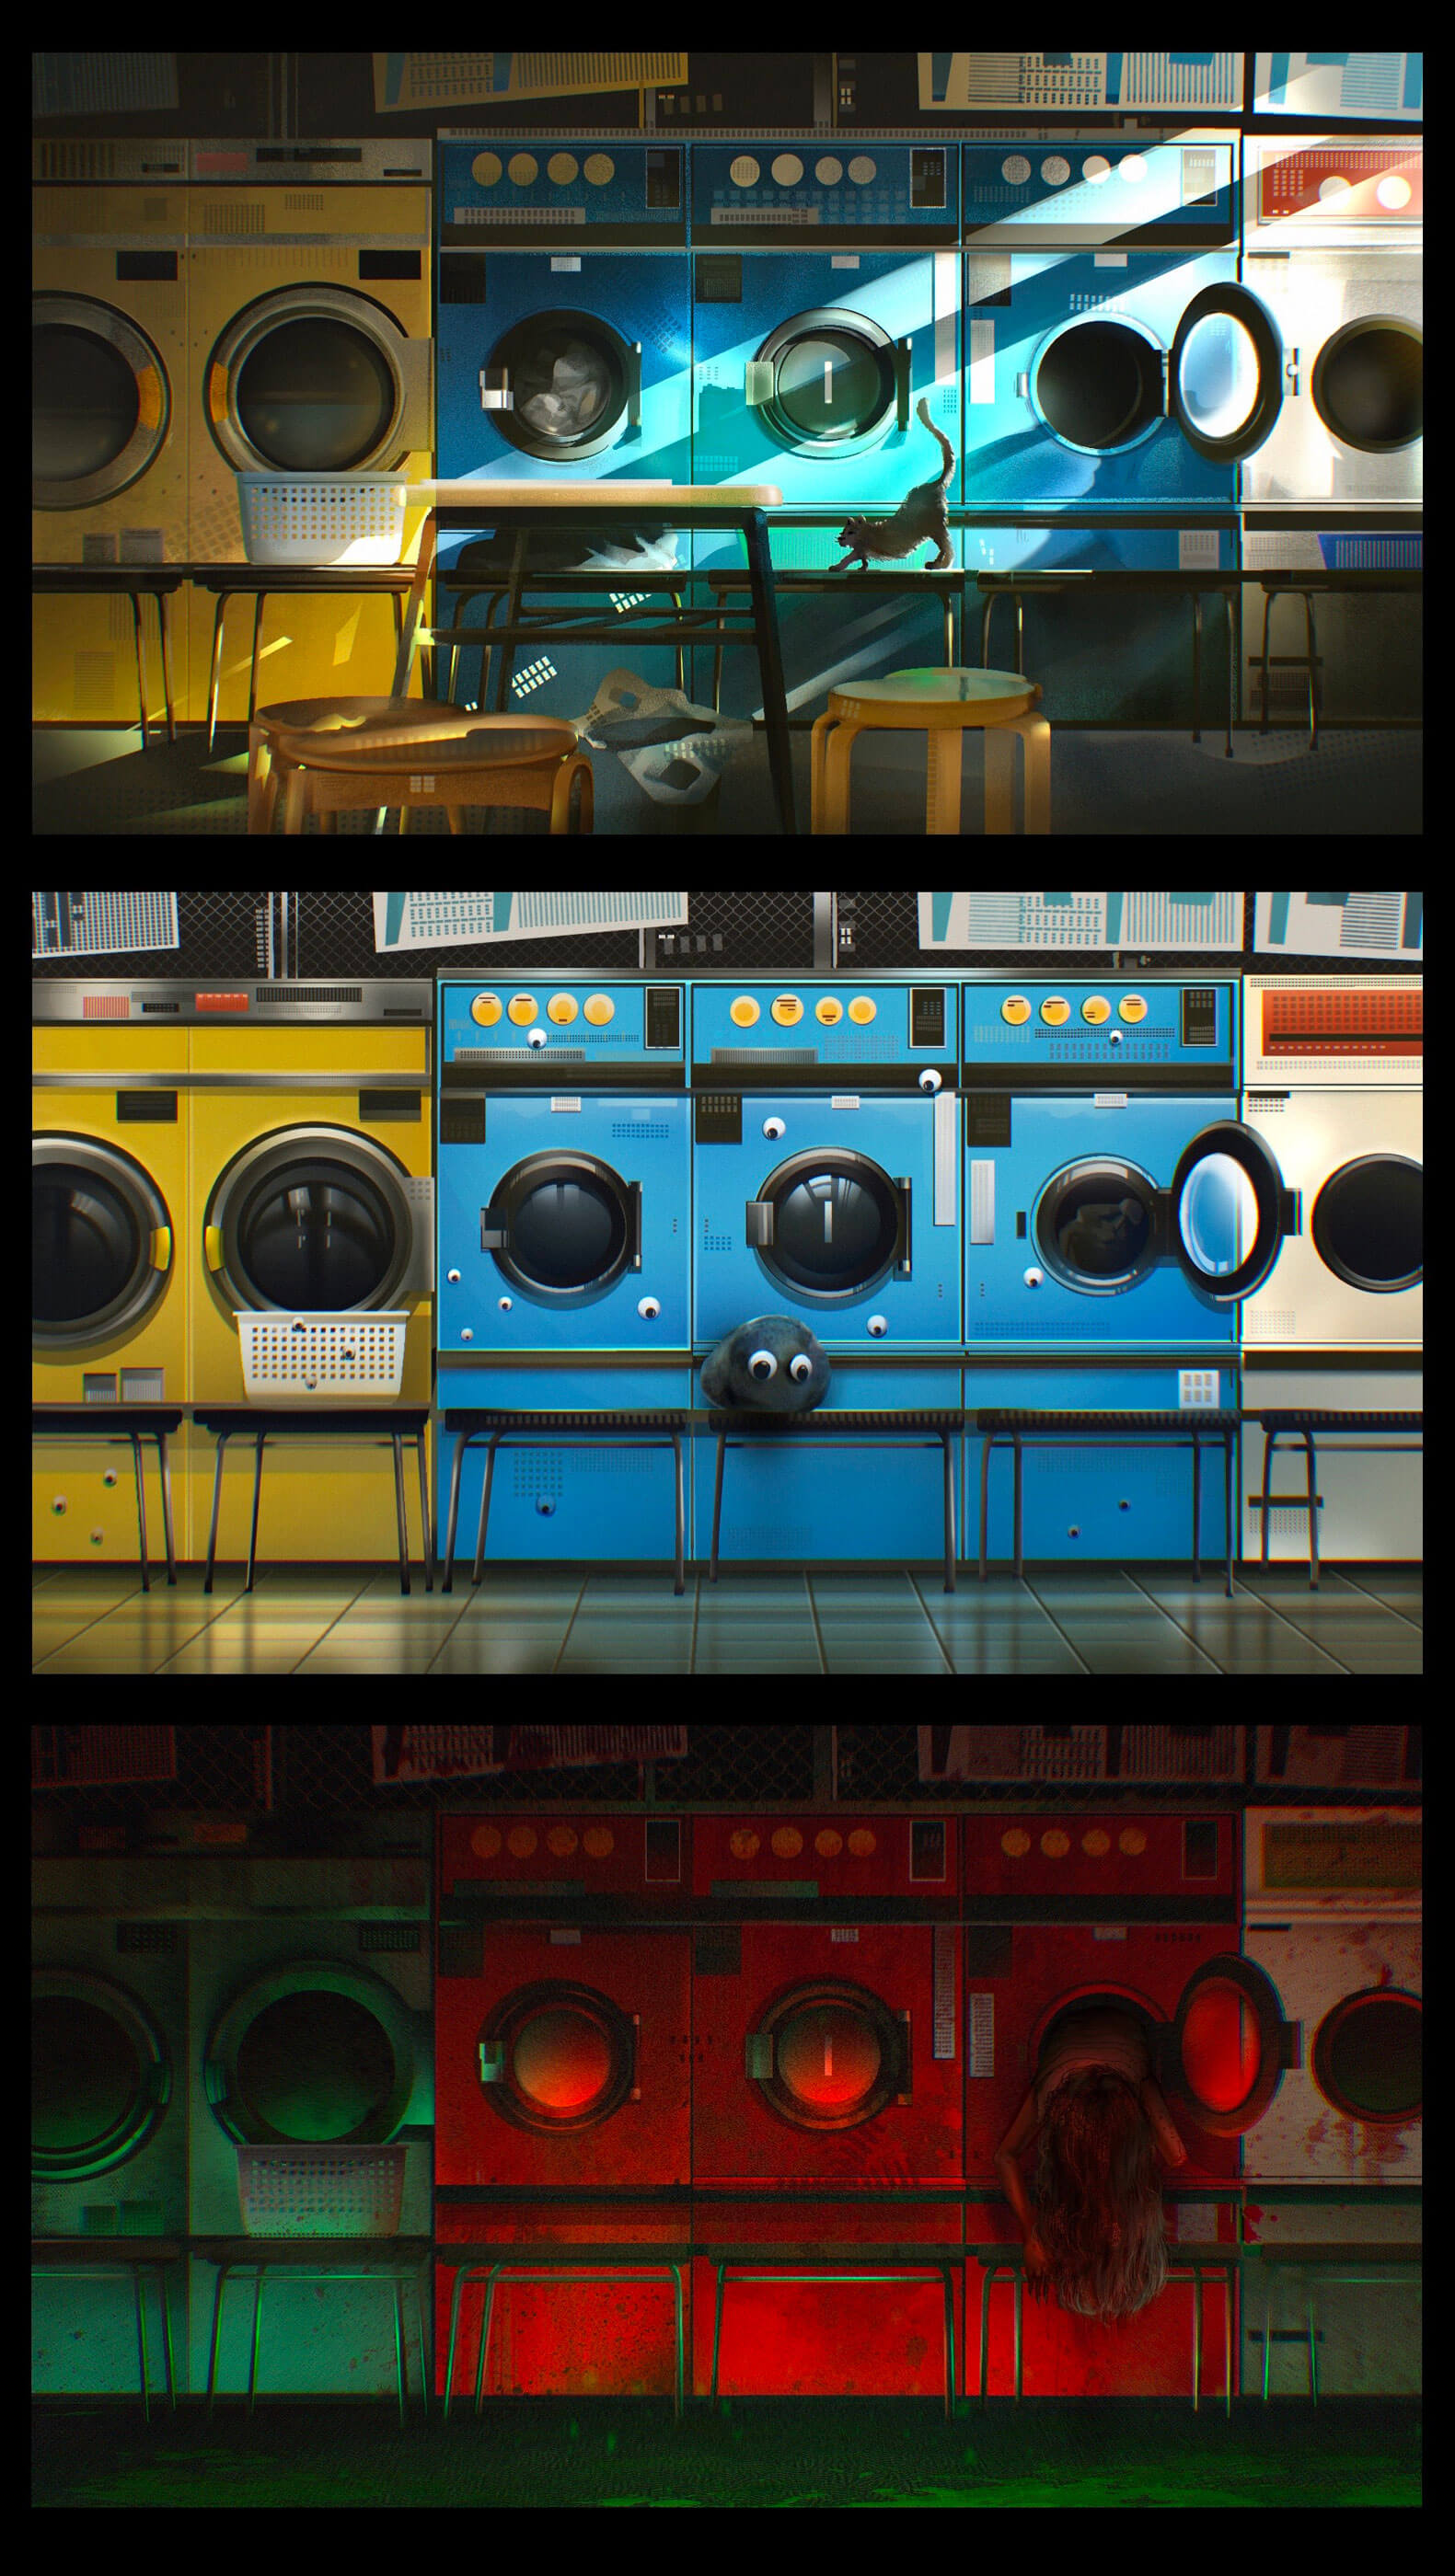 Three different shots of multicolored washing machines that also feature a cat and a harrowing scene with a woman hanging out a red washing machine